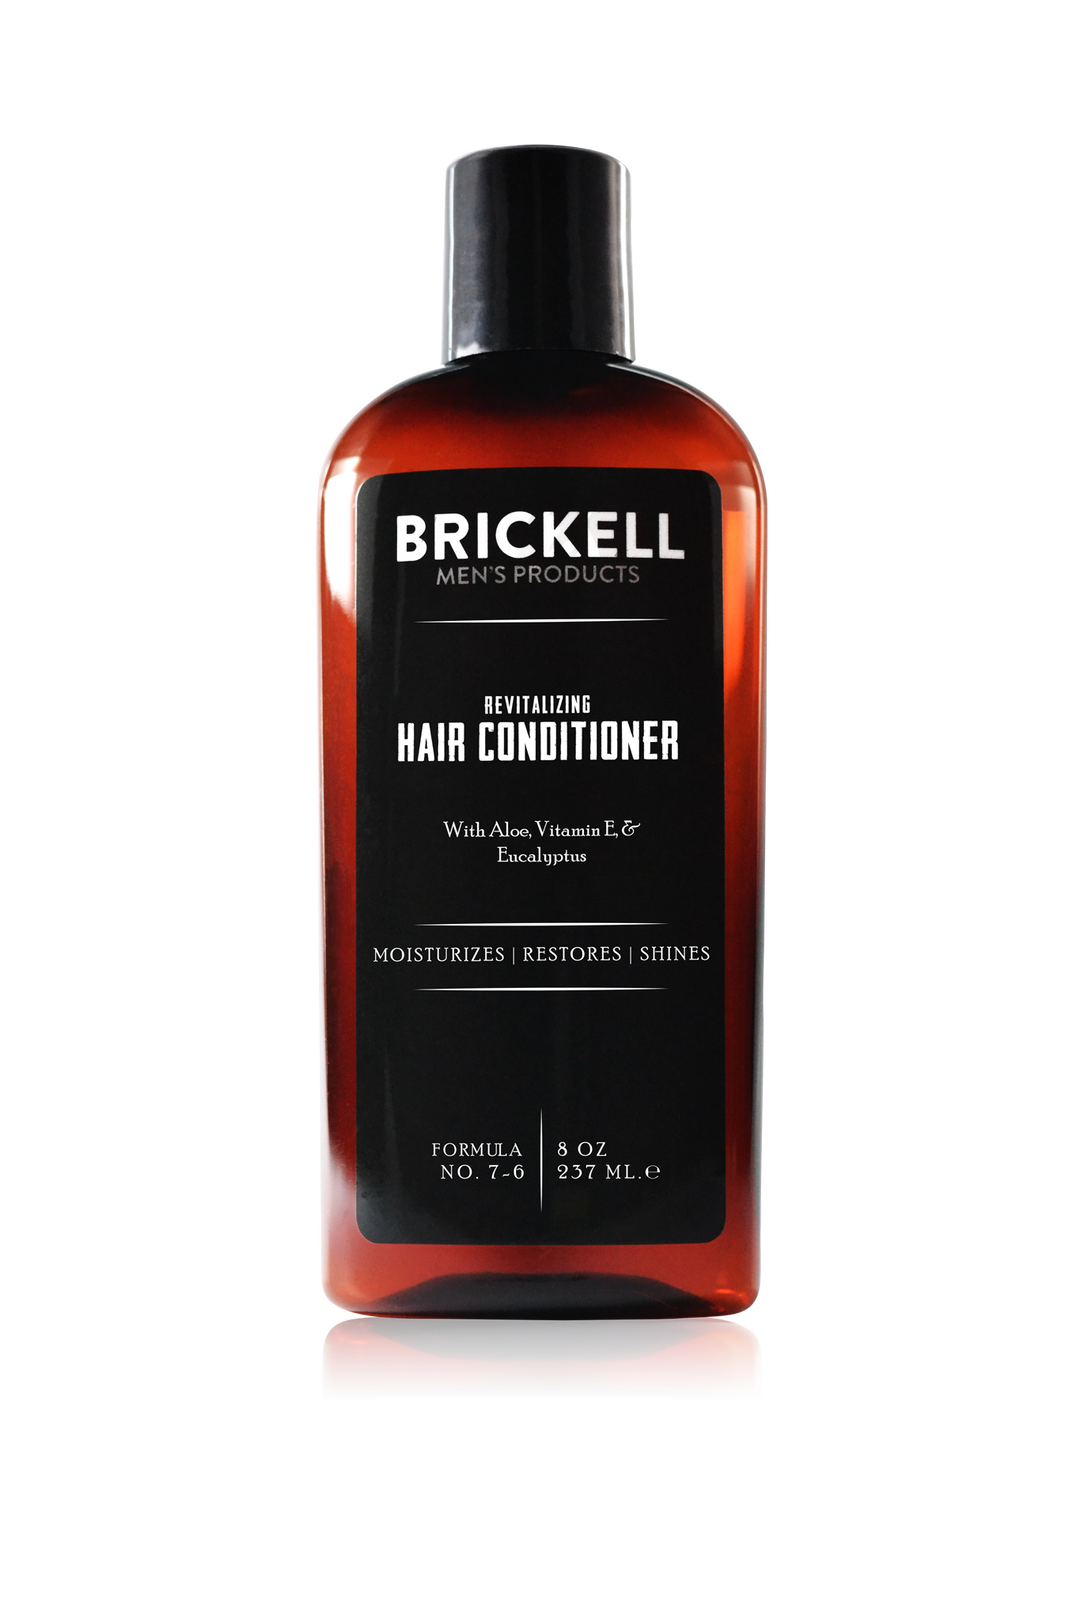 Brickell Men's Products Revitalizing Hair & Scalp Conditioner